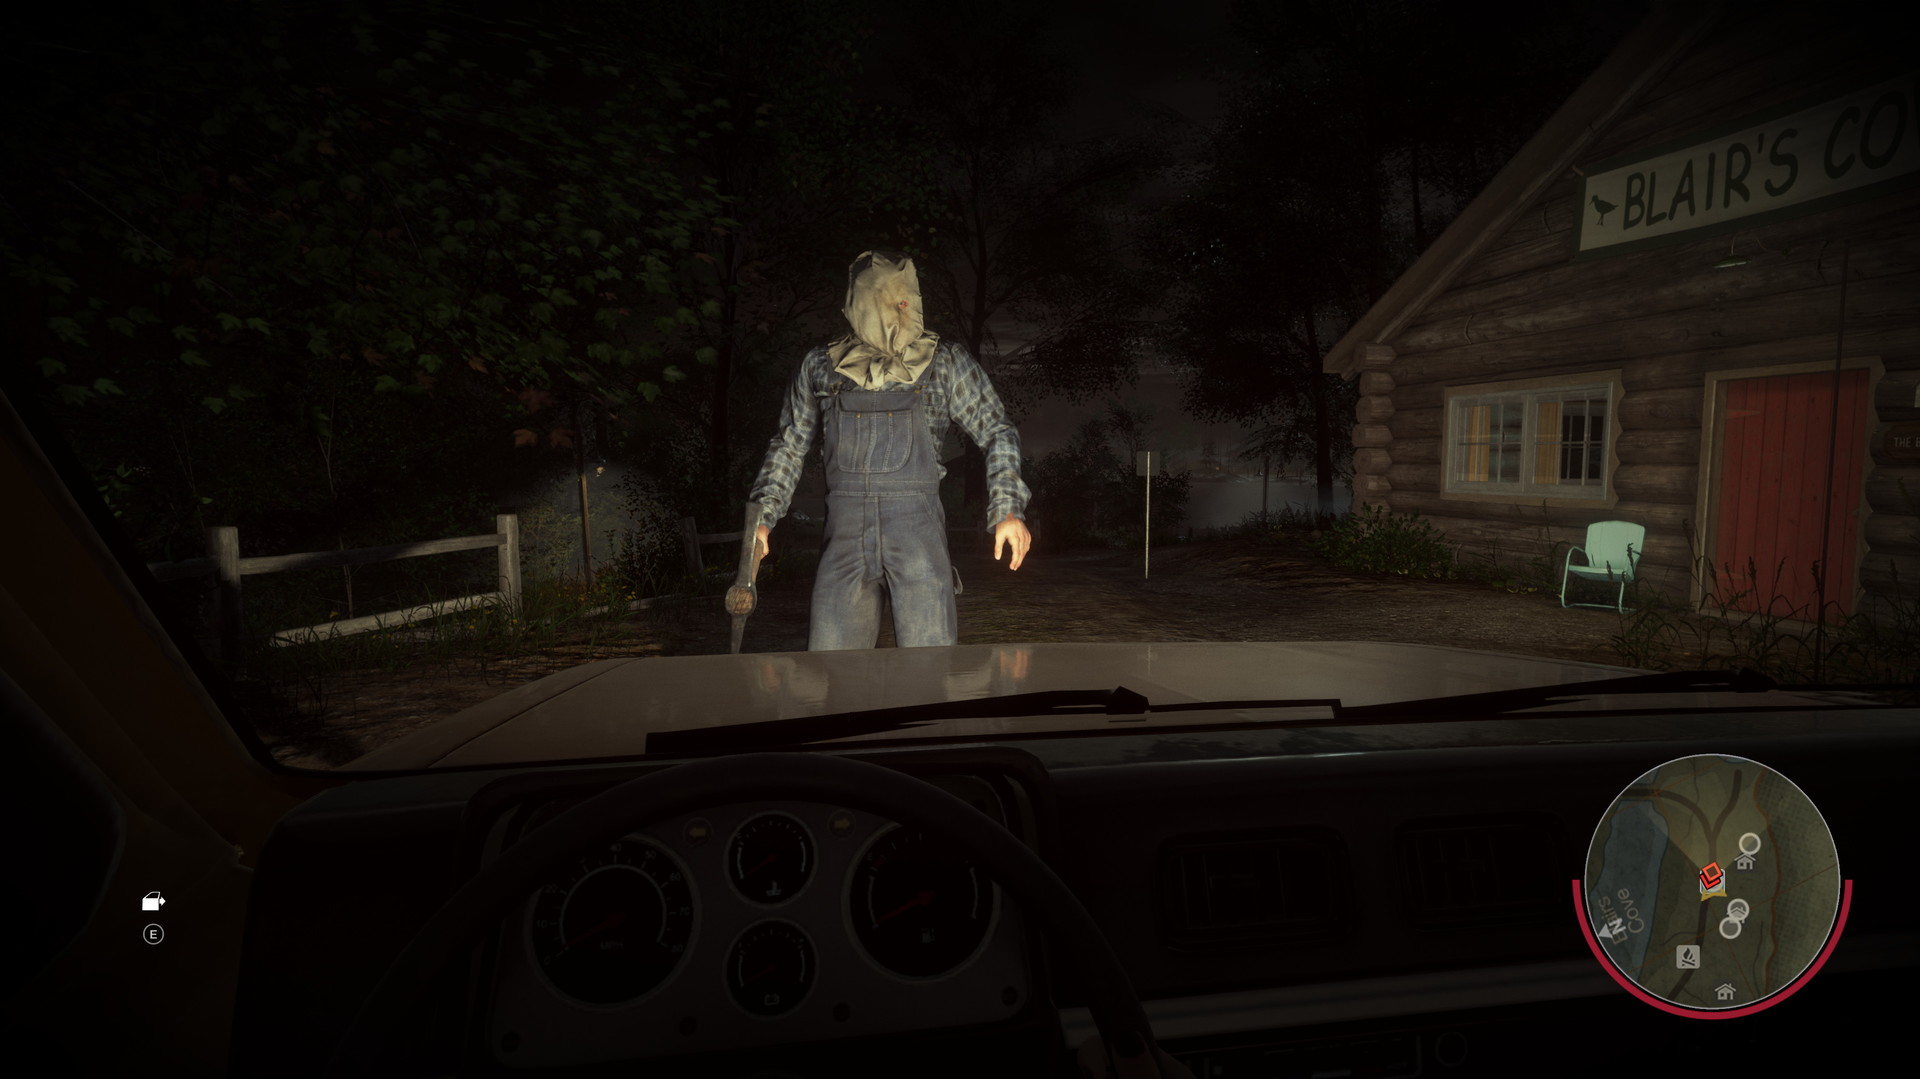 Friday the 13th: The Game - screenshot 3